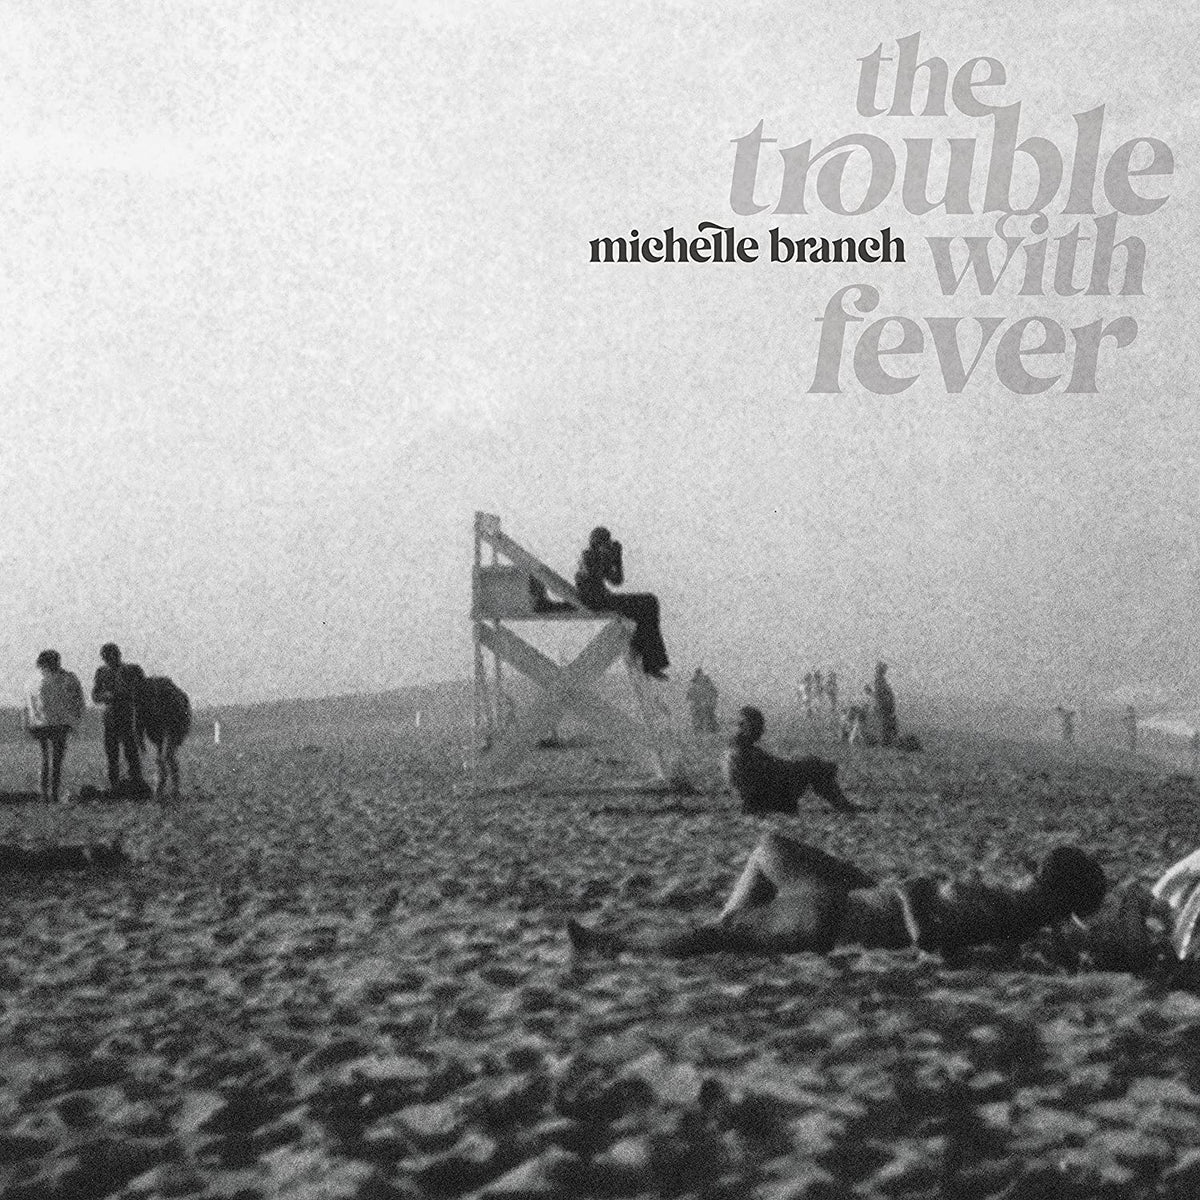 Michelle Branch – The Trouble With Fever (LP)